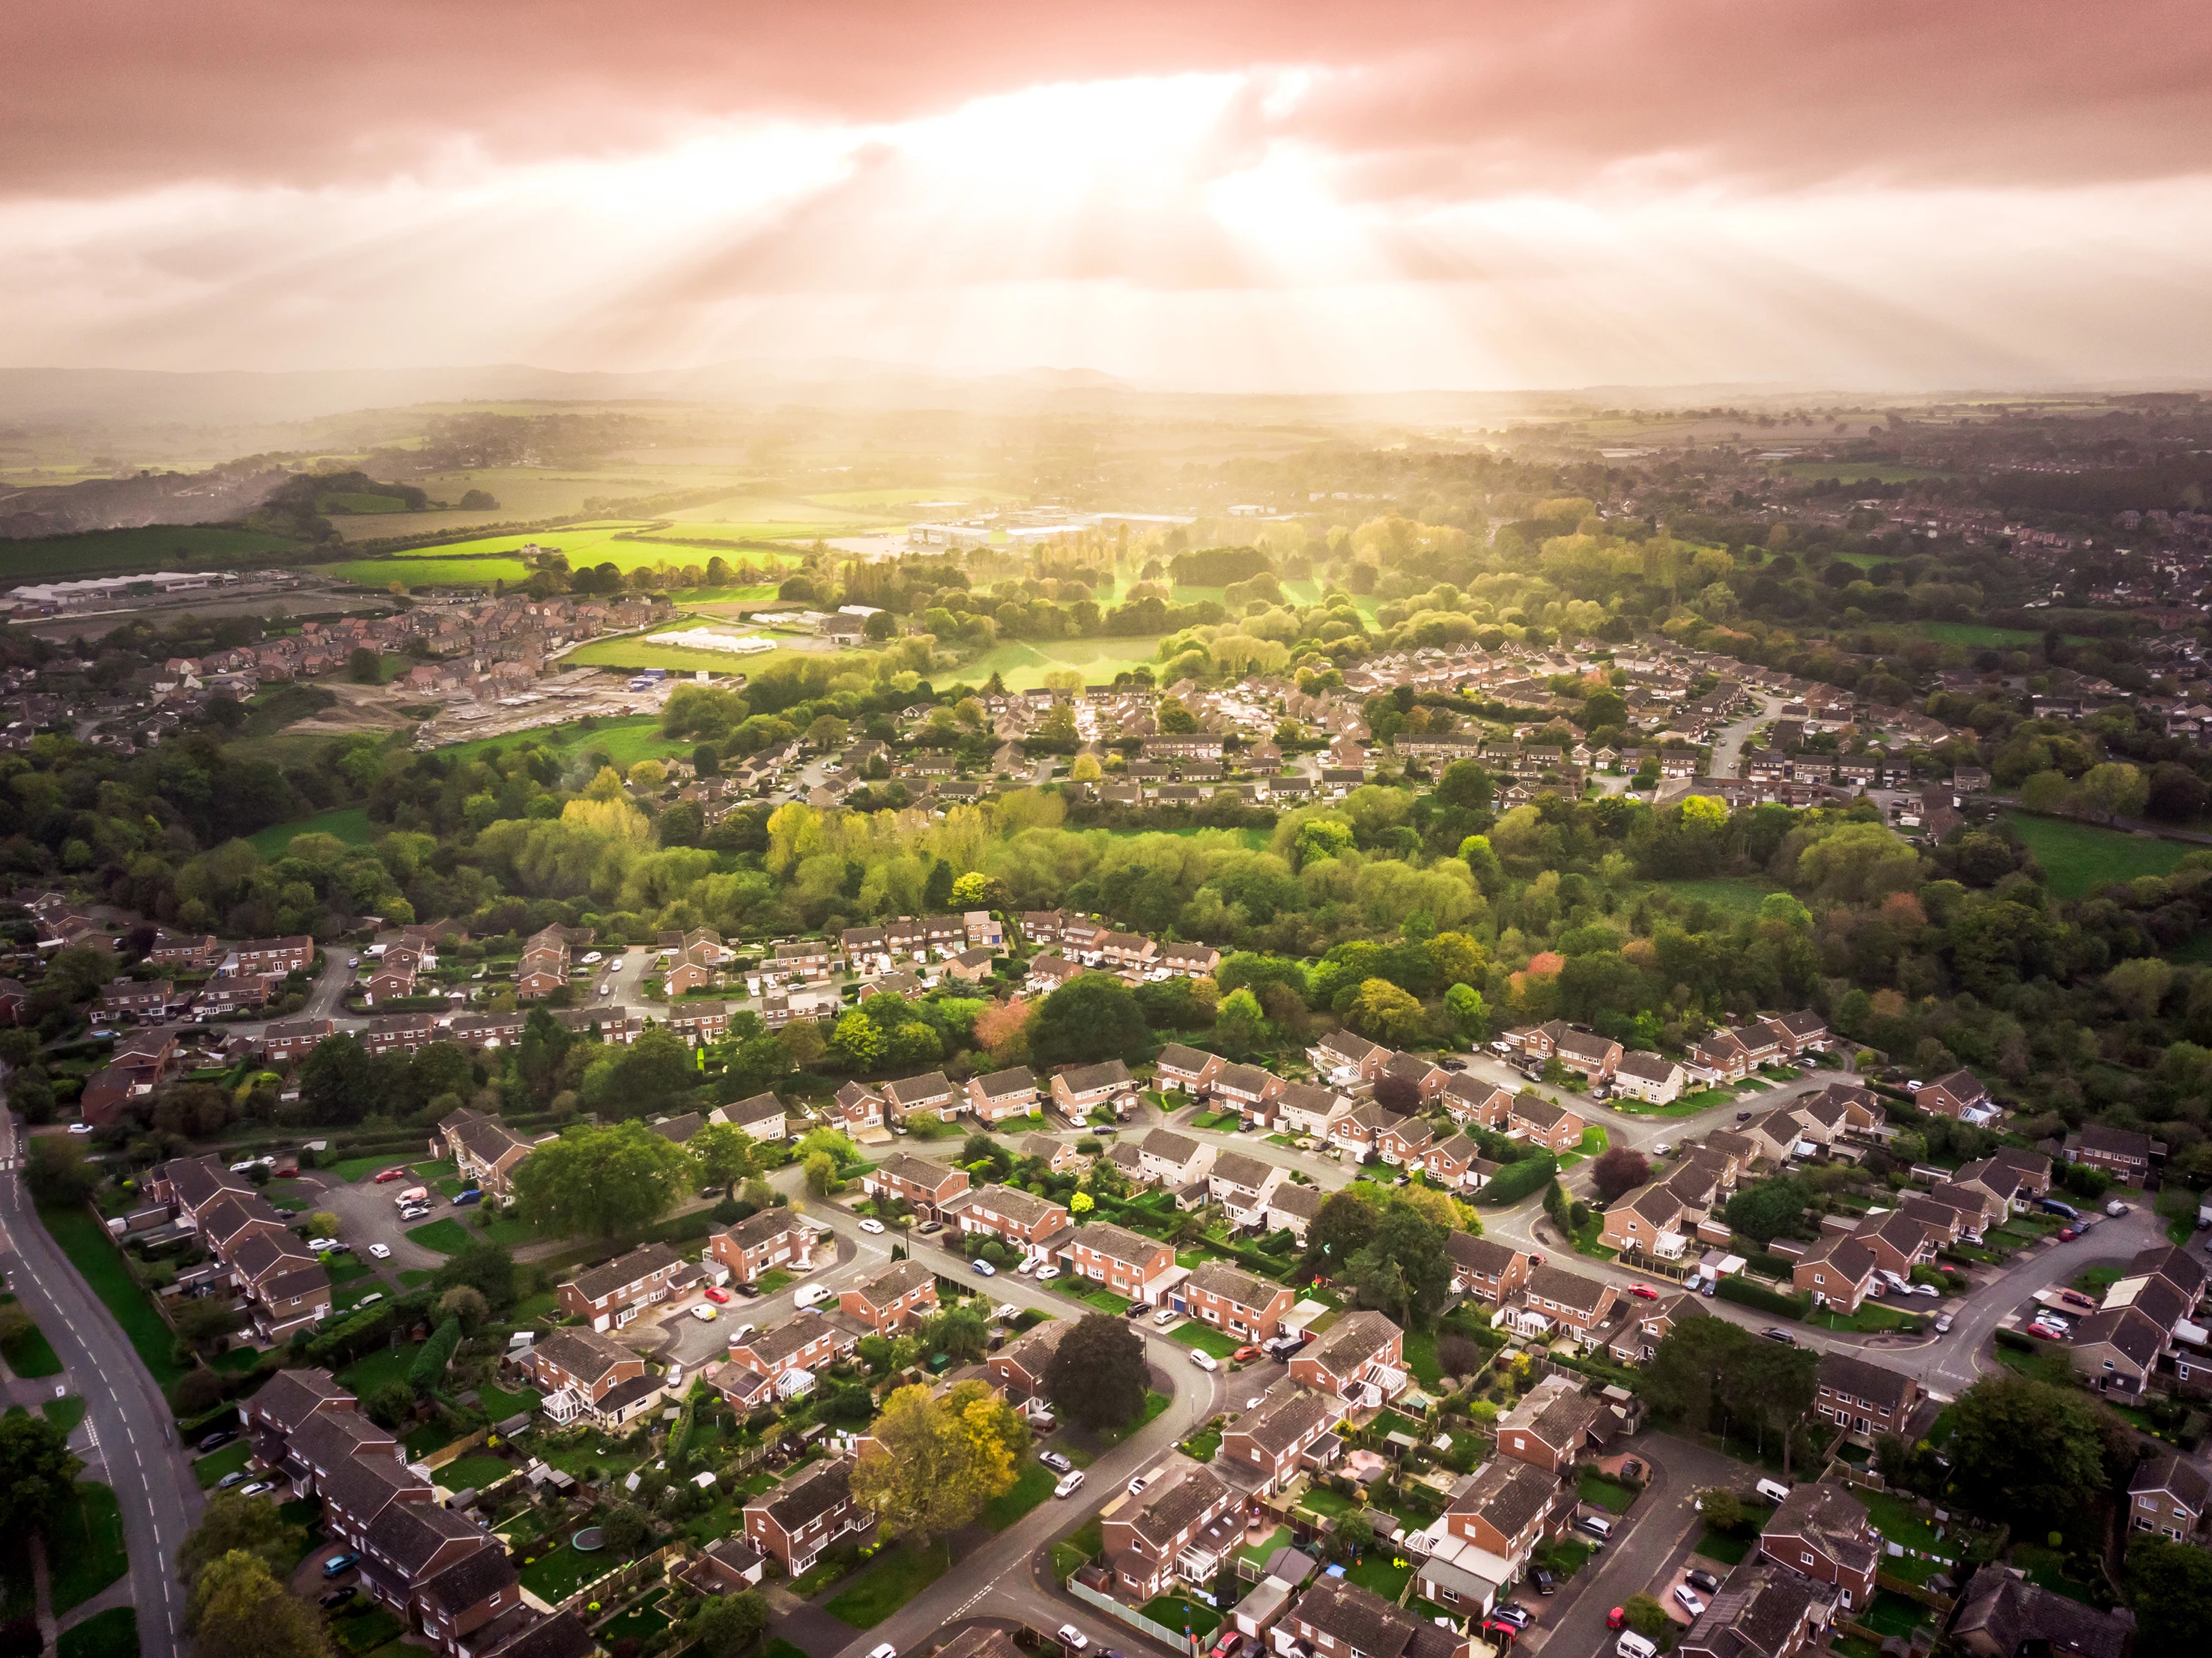 74% of UK residents want housing areas that foster a sense of community